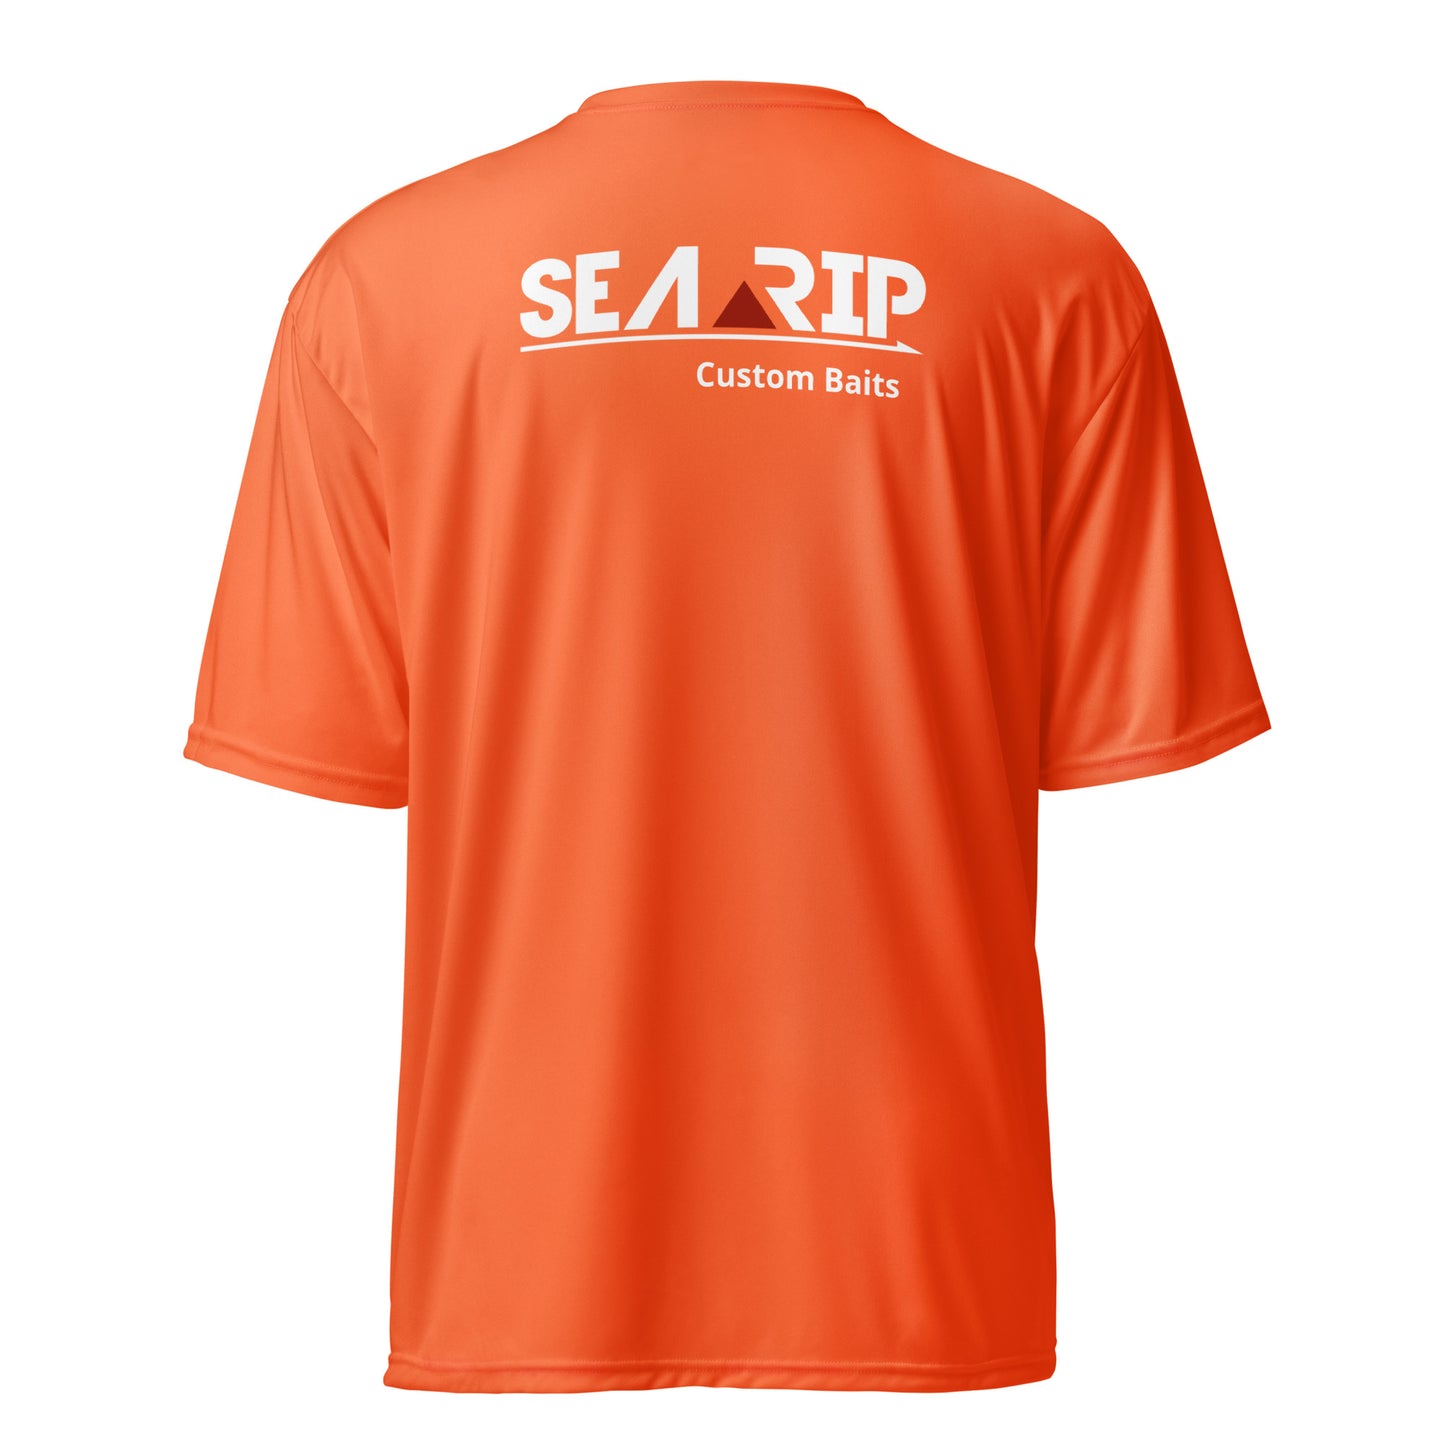 SEARIP Unisex performance crew neck t-shirt front and back logo